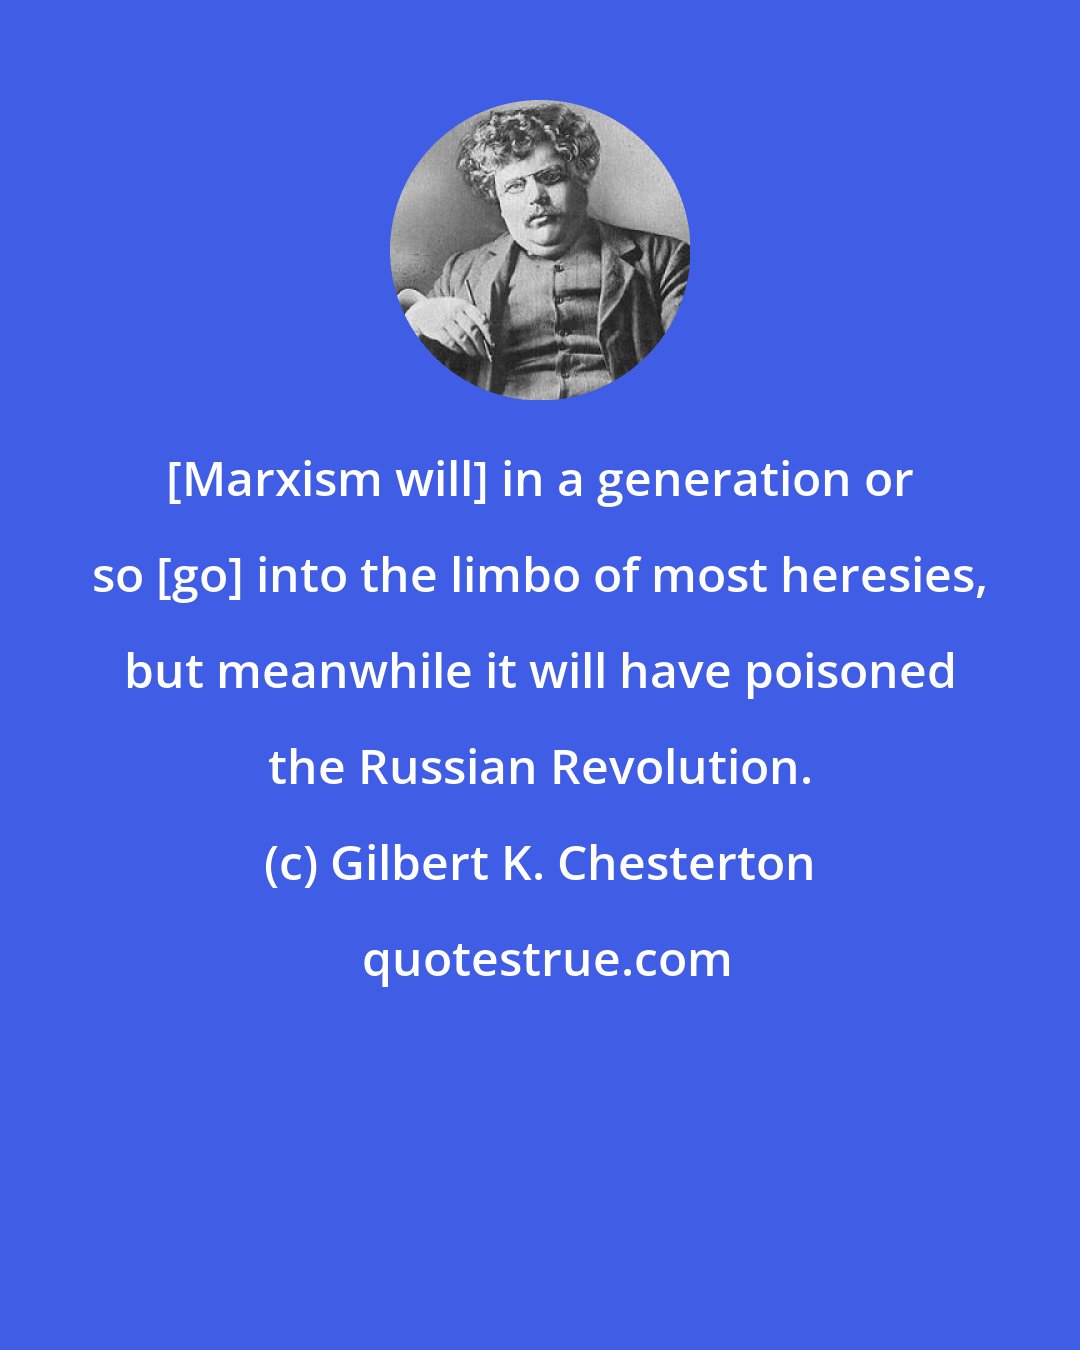 Gilbert K. Chesterton: [Marxism will] in a generation or so [go] into the limbo of most heresies, but meanwhile it will have poisoned the Russian Revolution.